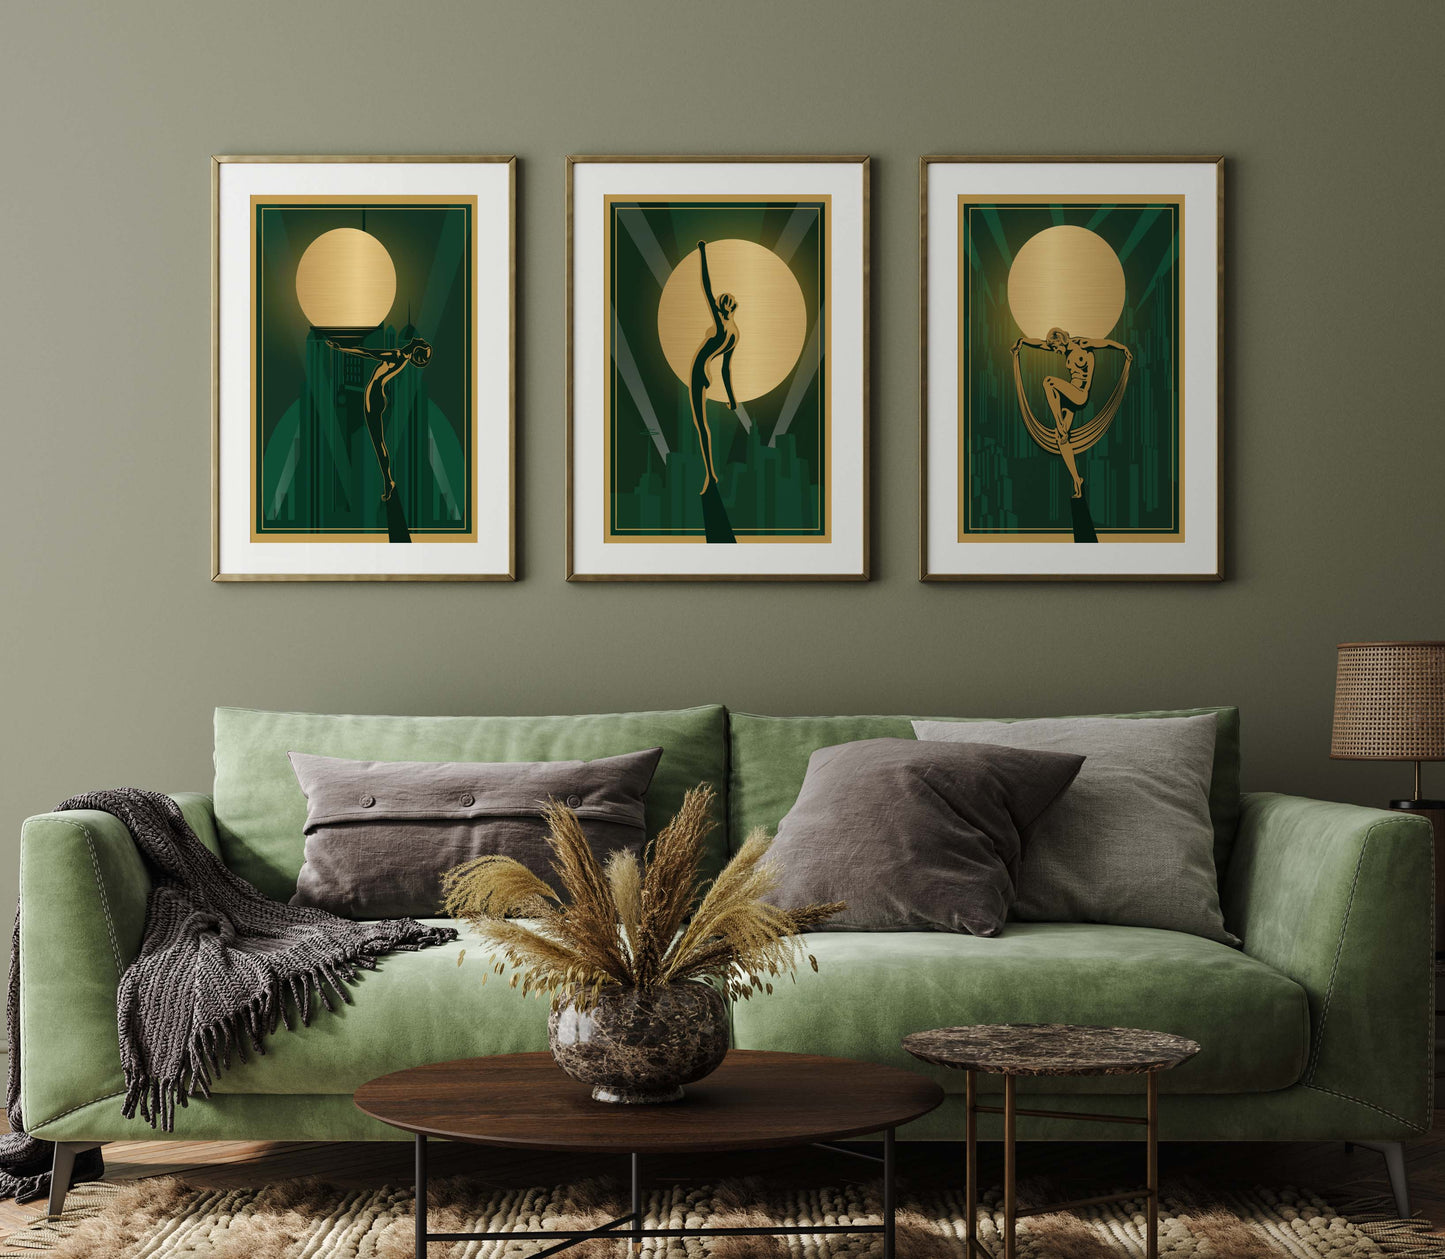 Set of art deco posters, with woman holding gold circle in green and gold